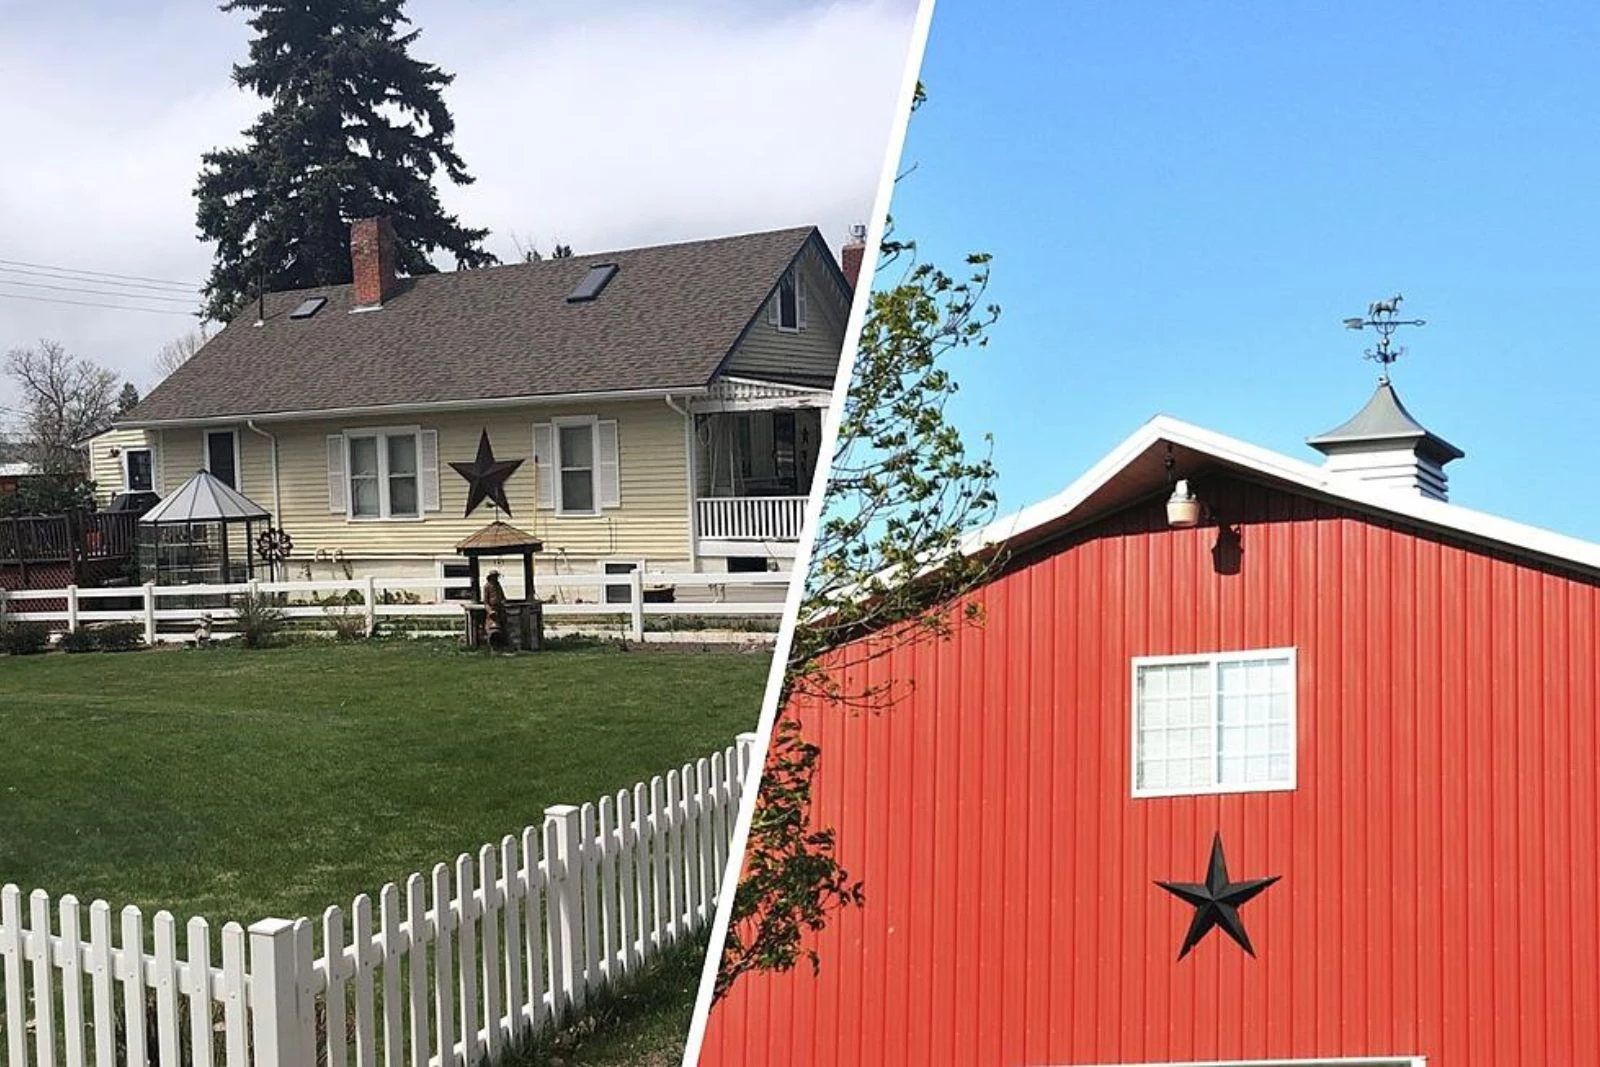 Montana Houses with Big Stars Does Not Mean Theyre Swingers